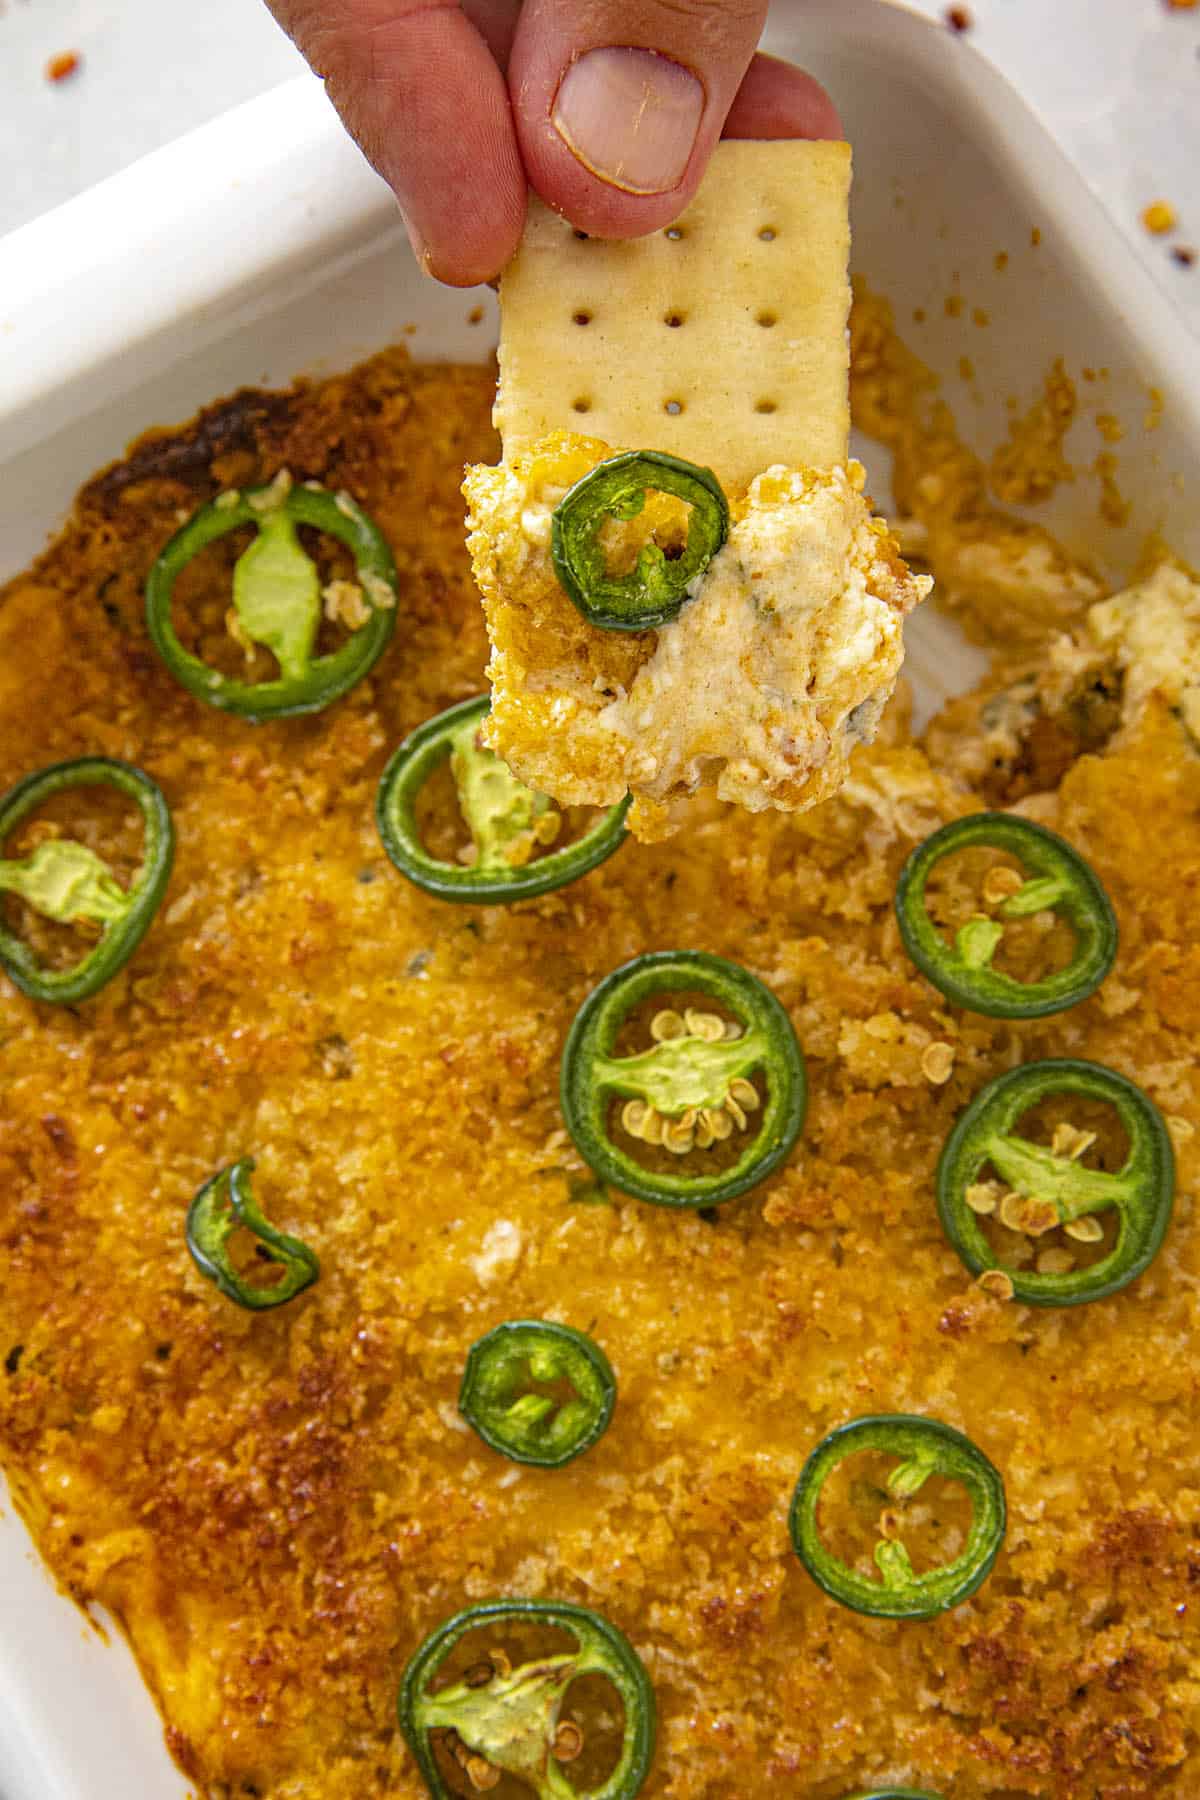 A scoop of Jalapeno Popper Dip on a cracker